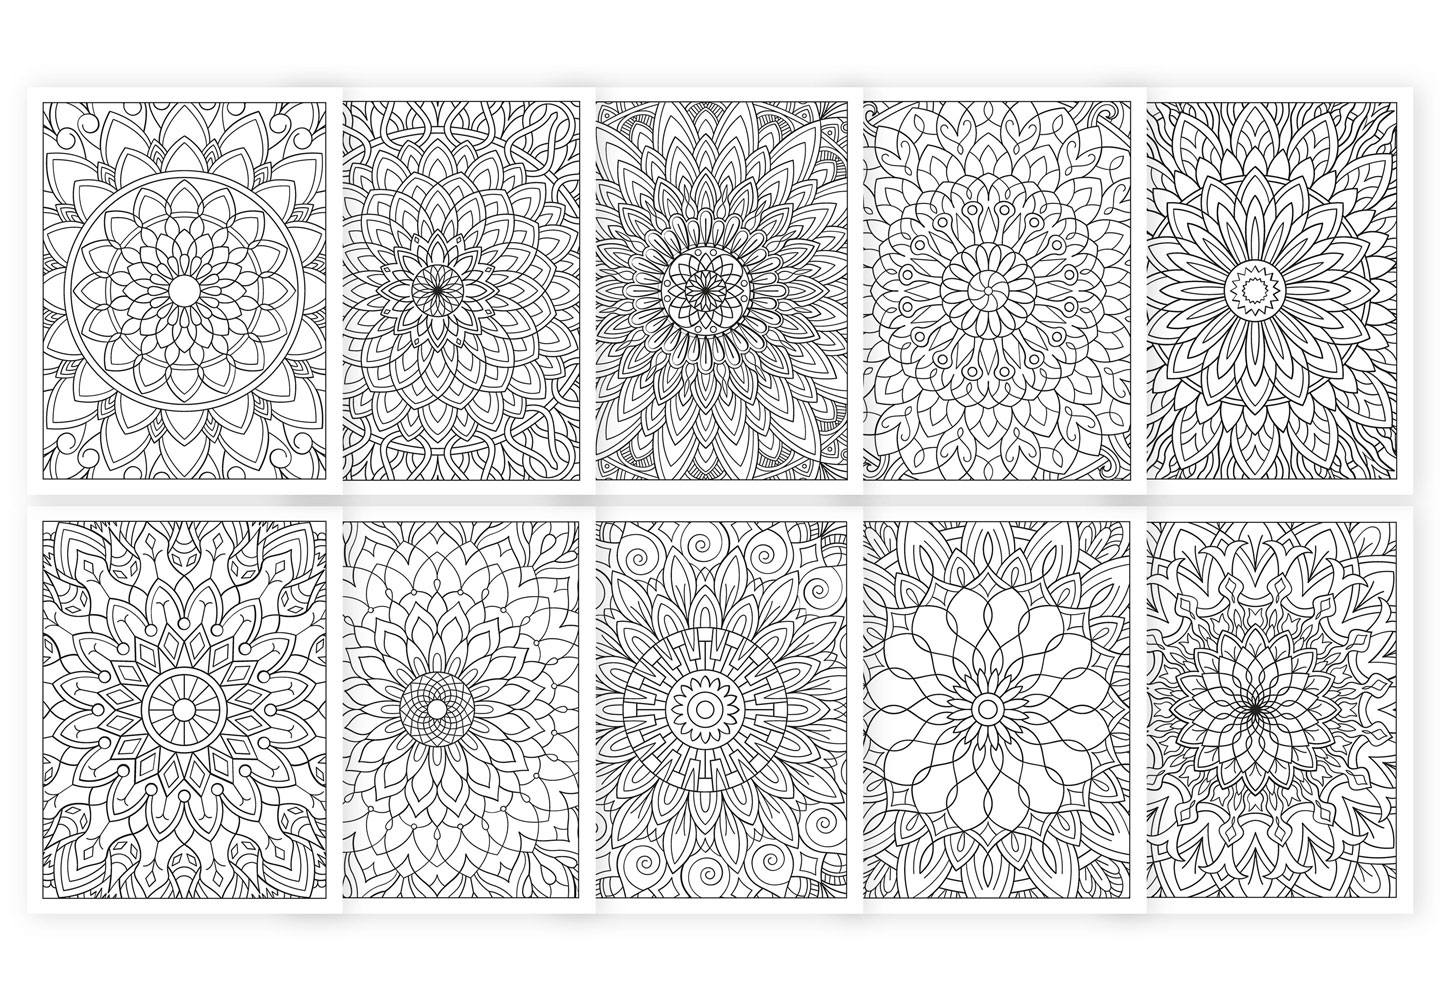 Mandala coloring pages for adult